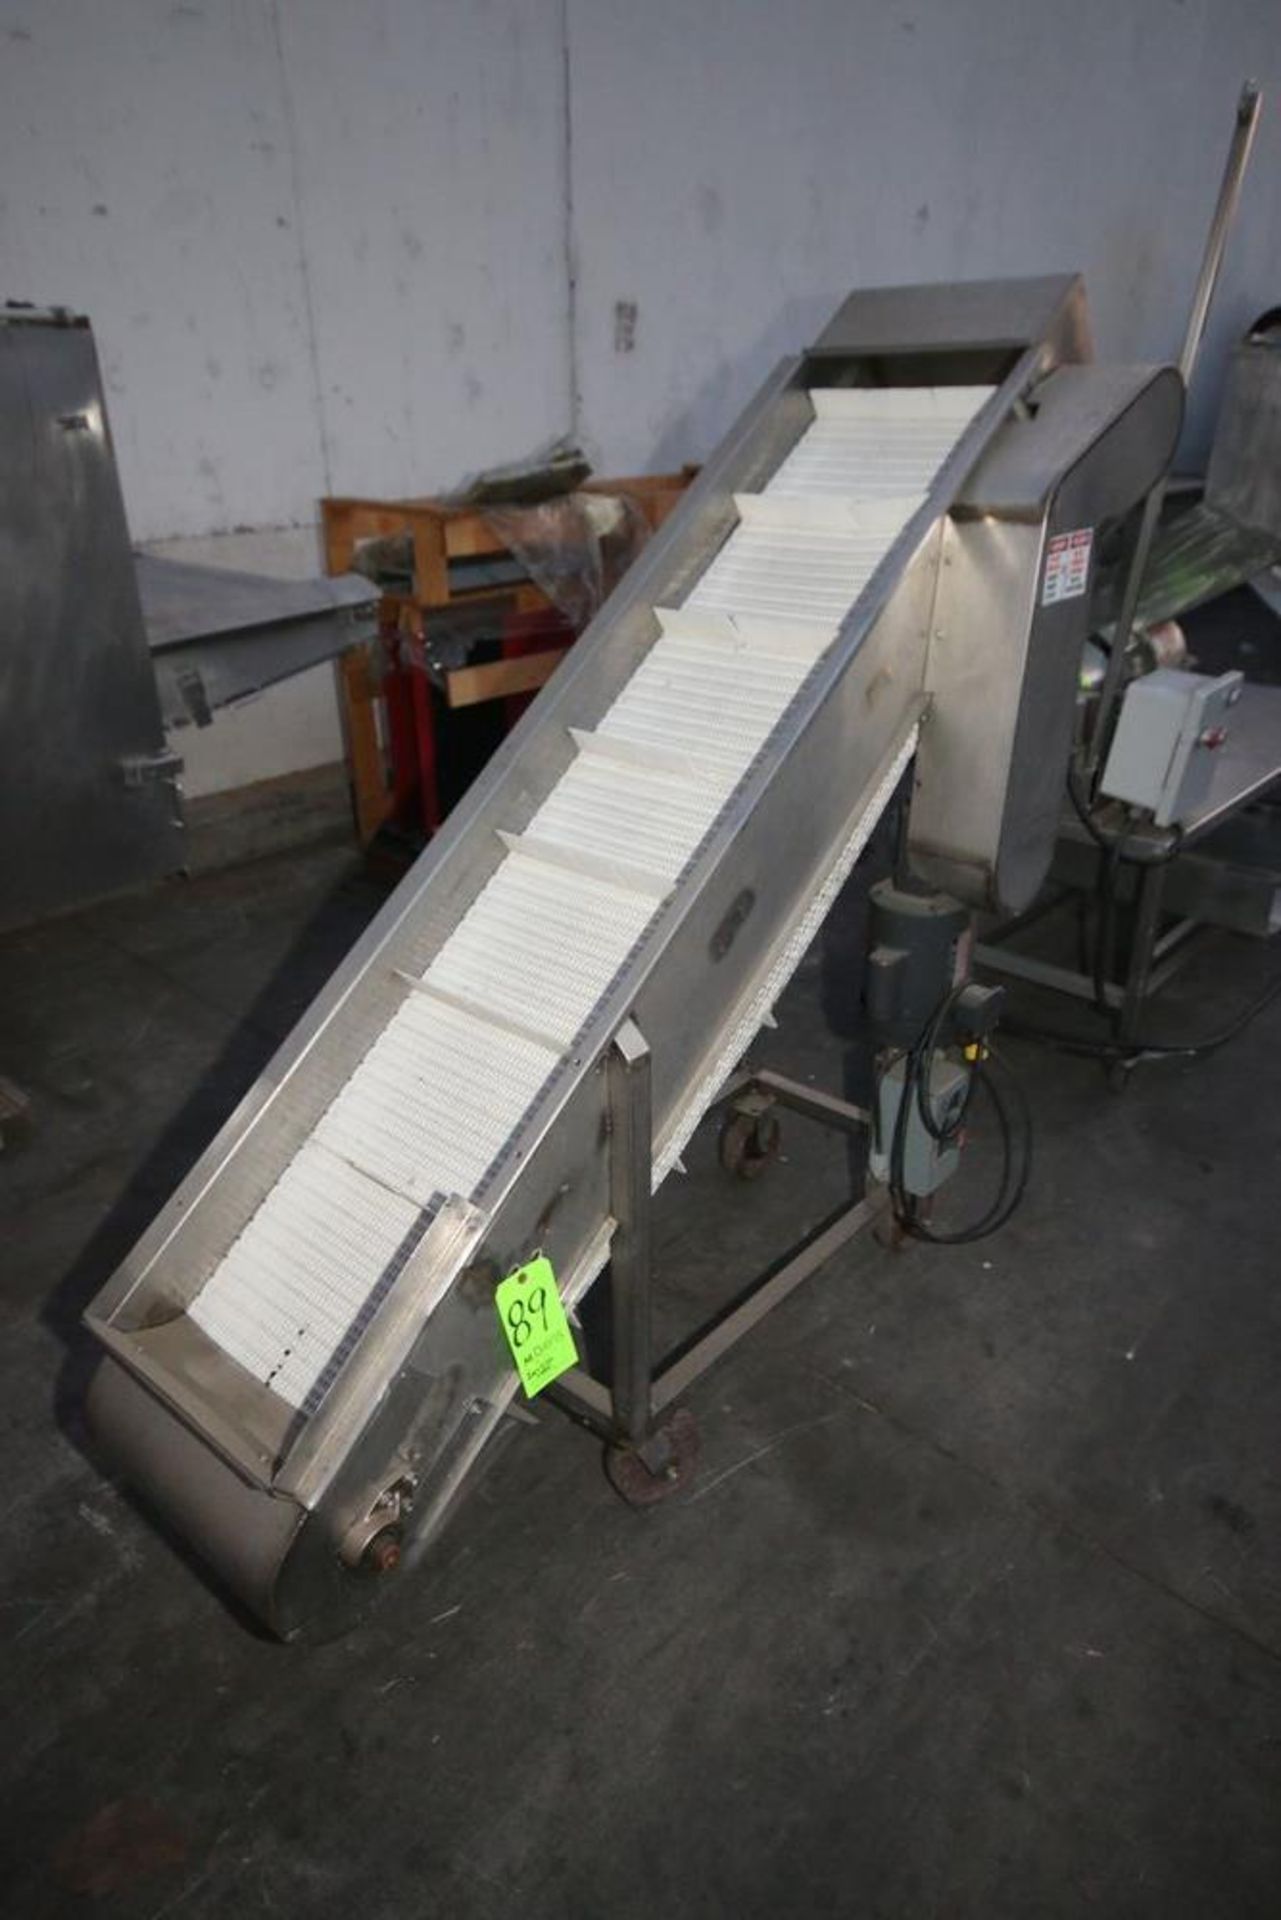 Section of S/S Incline Conveyor with Flights, Aprox. 72" L x 15" W, with 9-1/2" W Flight Spacing,